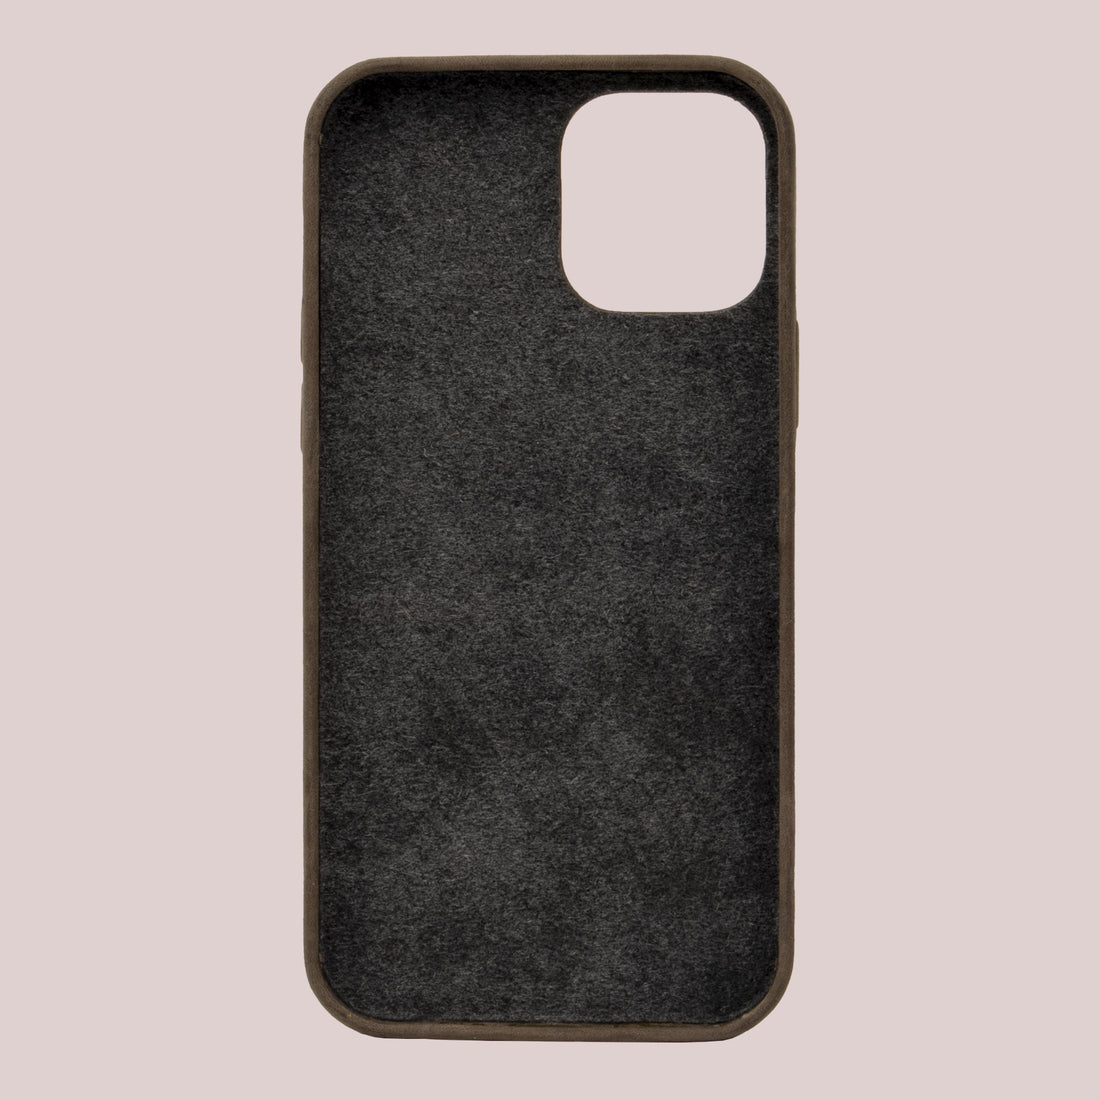 Kalon Case for iPhone 12 with MagSafe Compatibility - Dark Soil